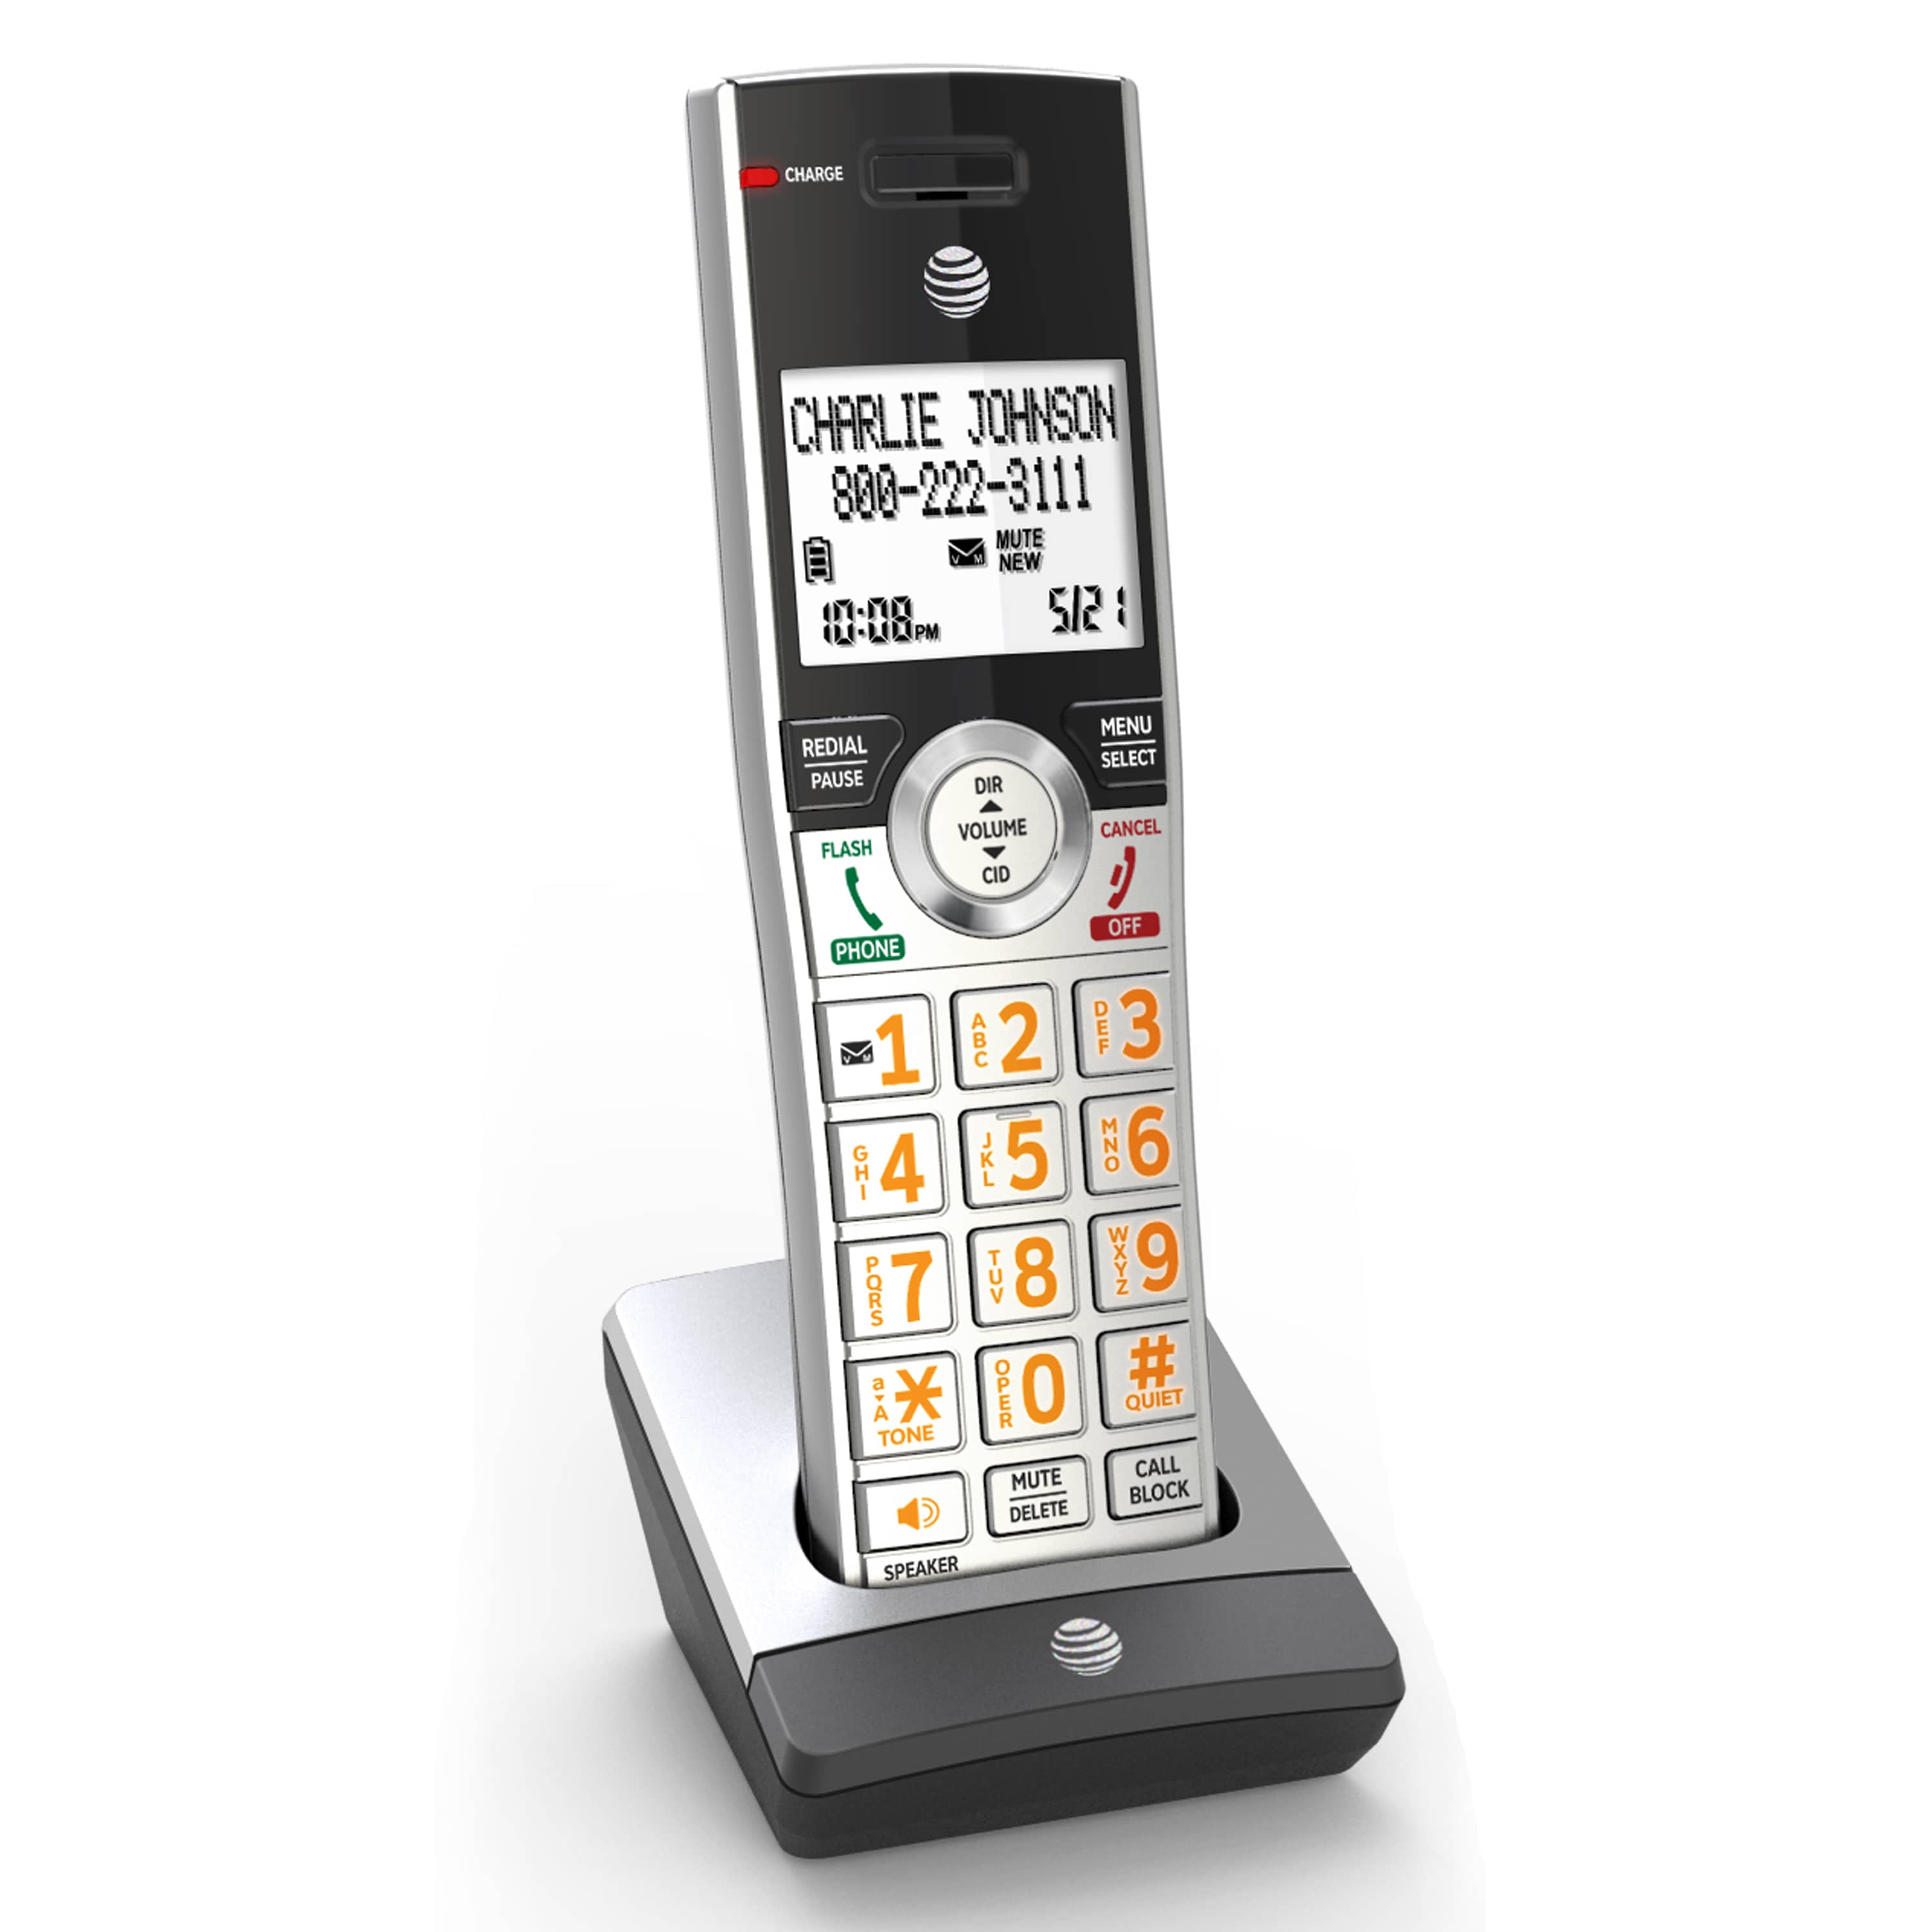 Cordless Accessory Handset for AT&T CL82207, CL82267, CL82307, CL82367, CL82407, CL83207, CL83407, CL84107, and CL84207 - view 3